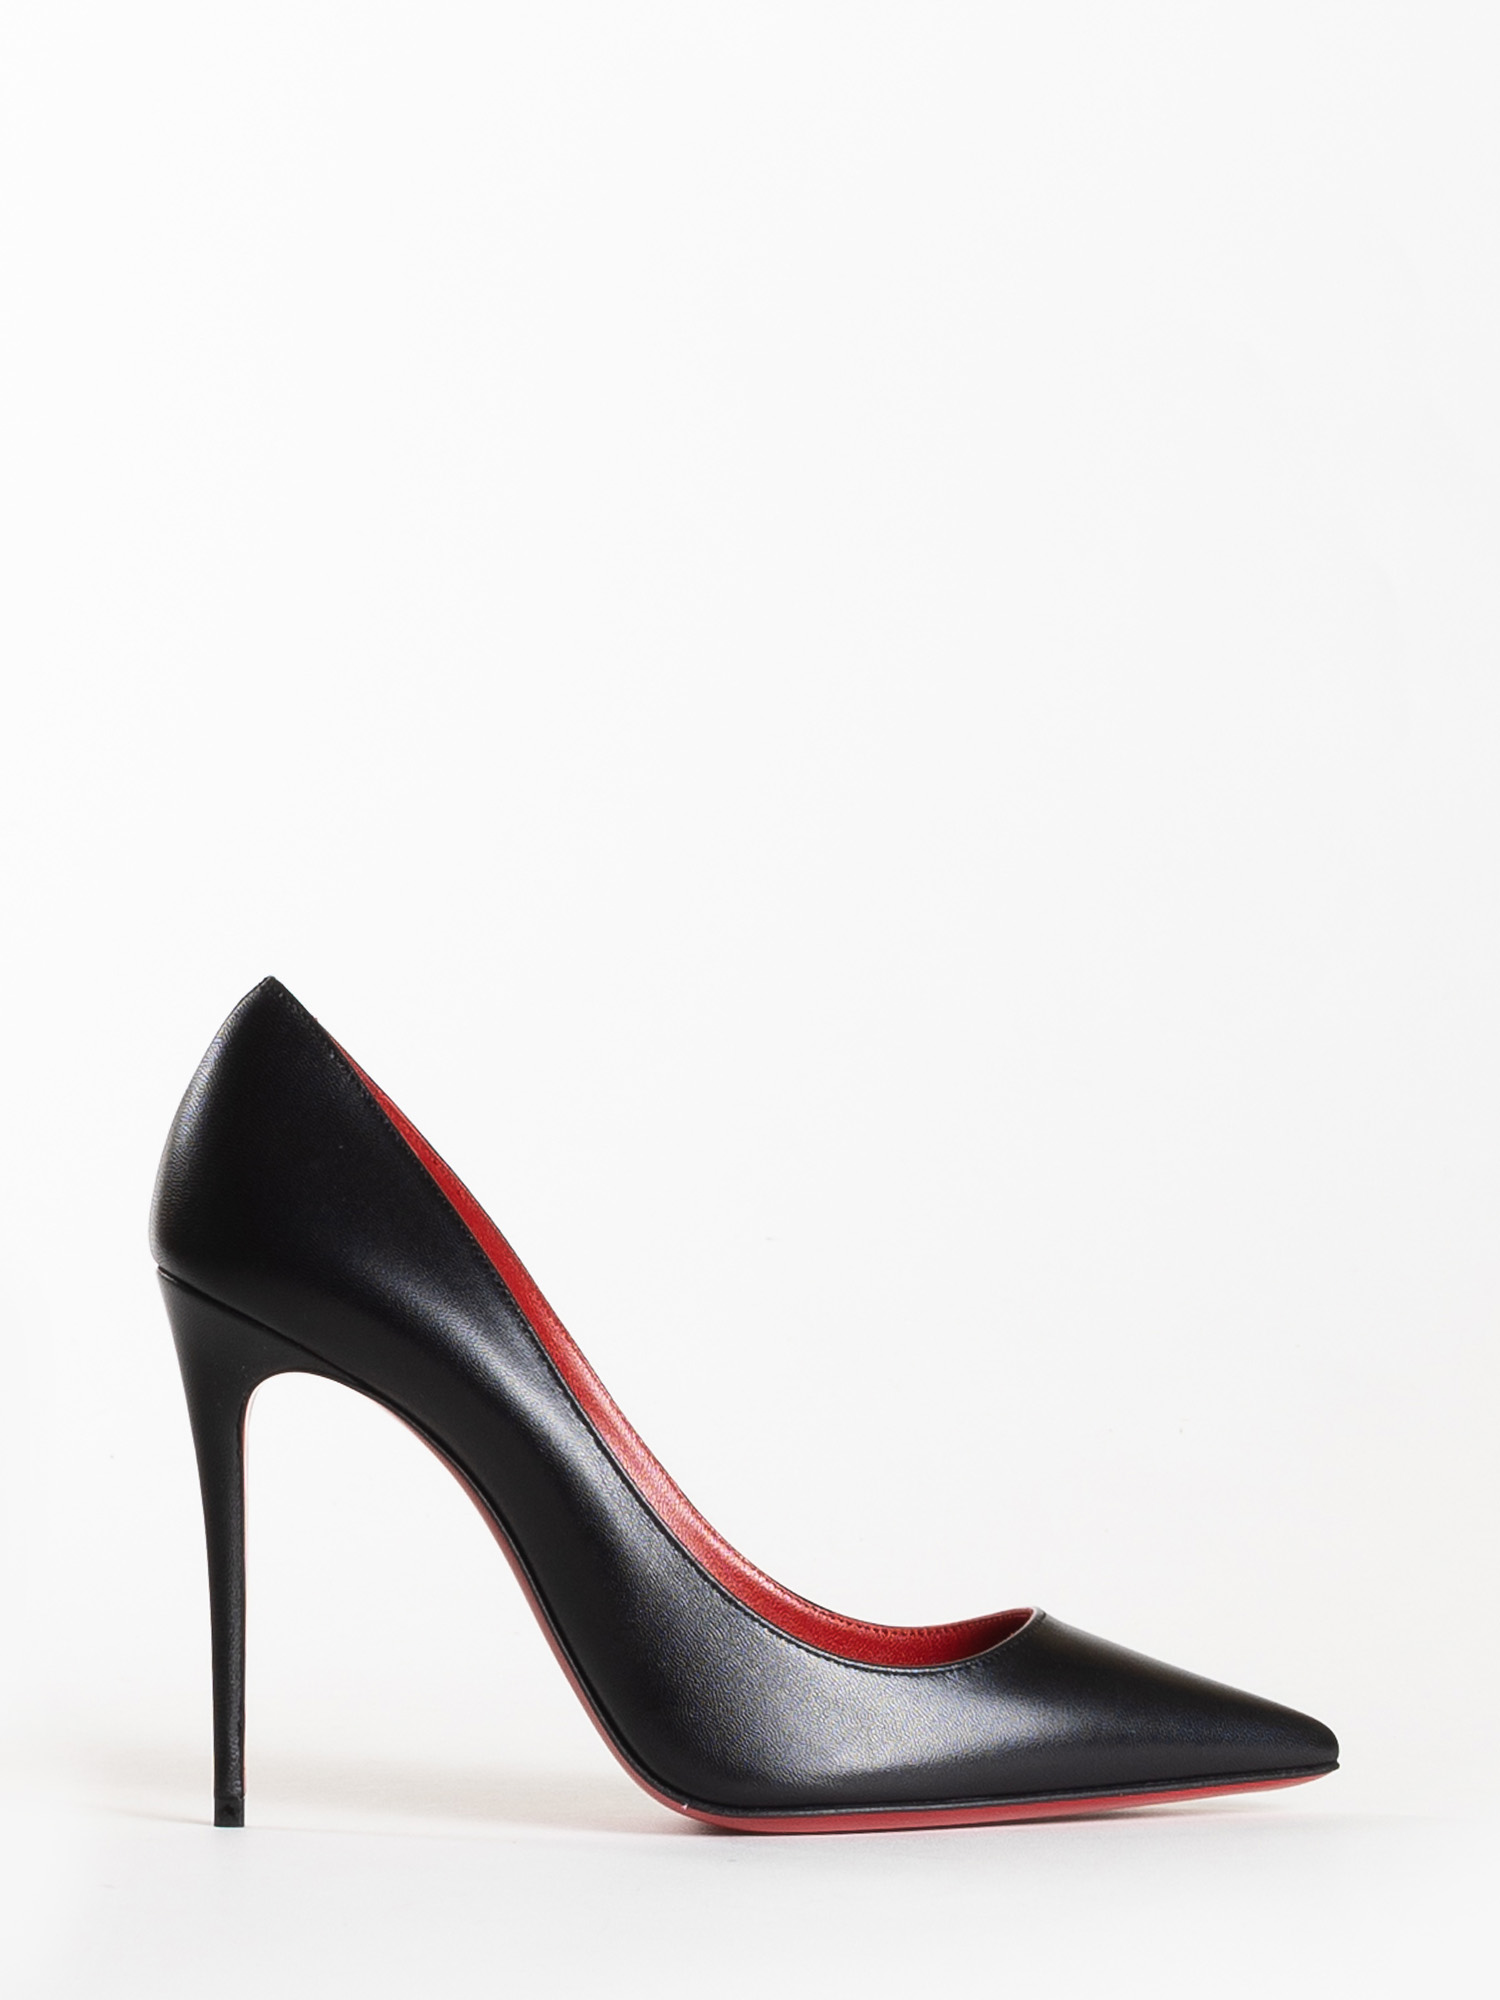 KATE LEATHER SHOES - CHRISTIAN LOUBOUTIN